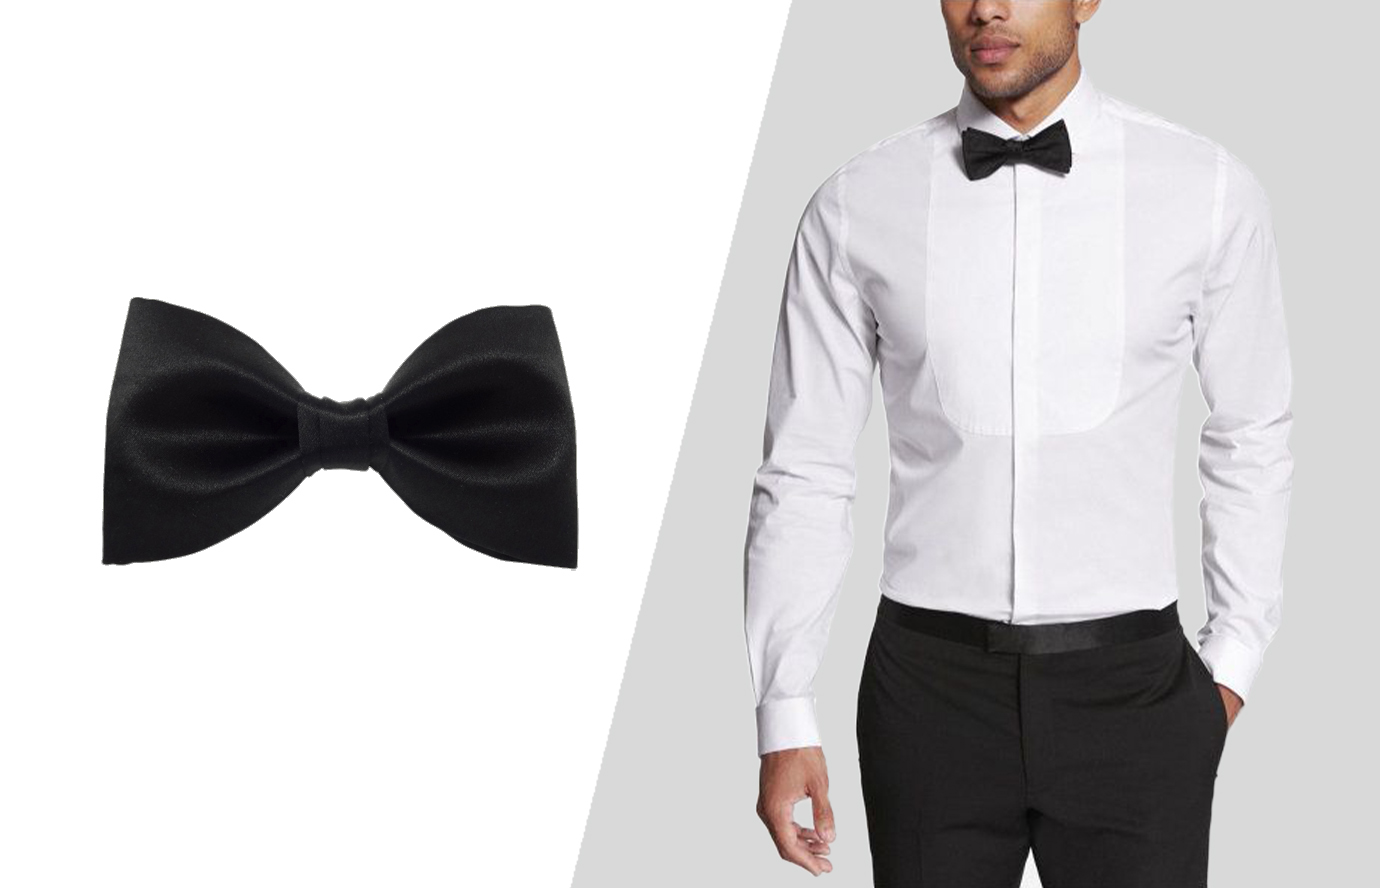 suit accessories: the bow tie